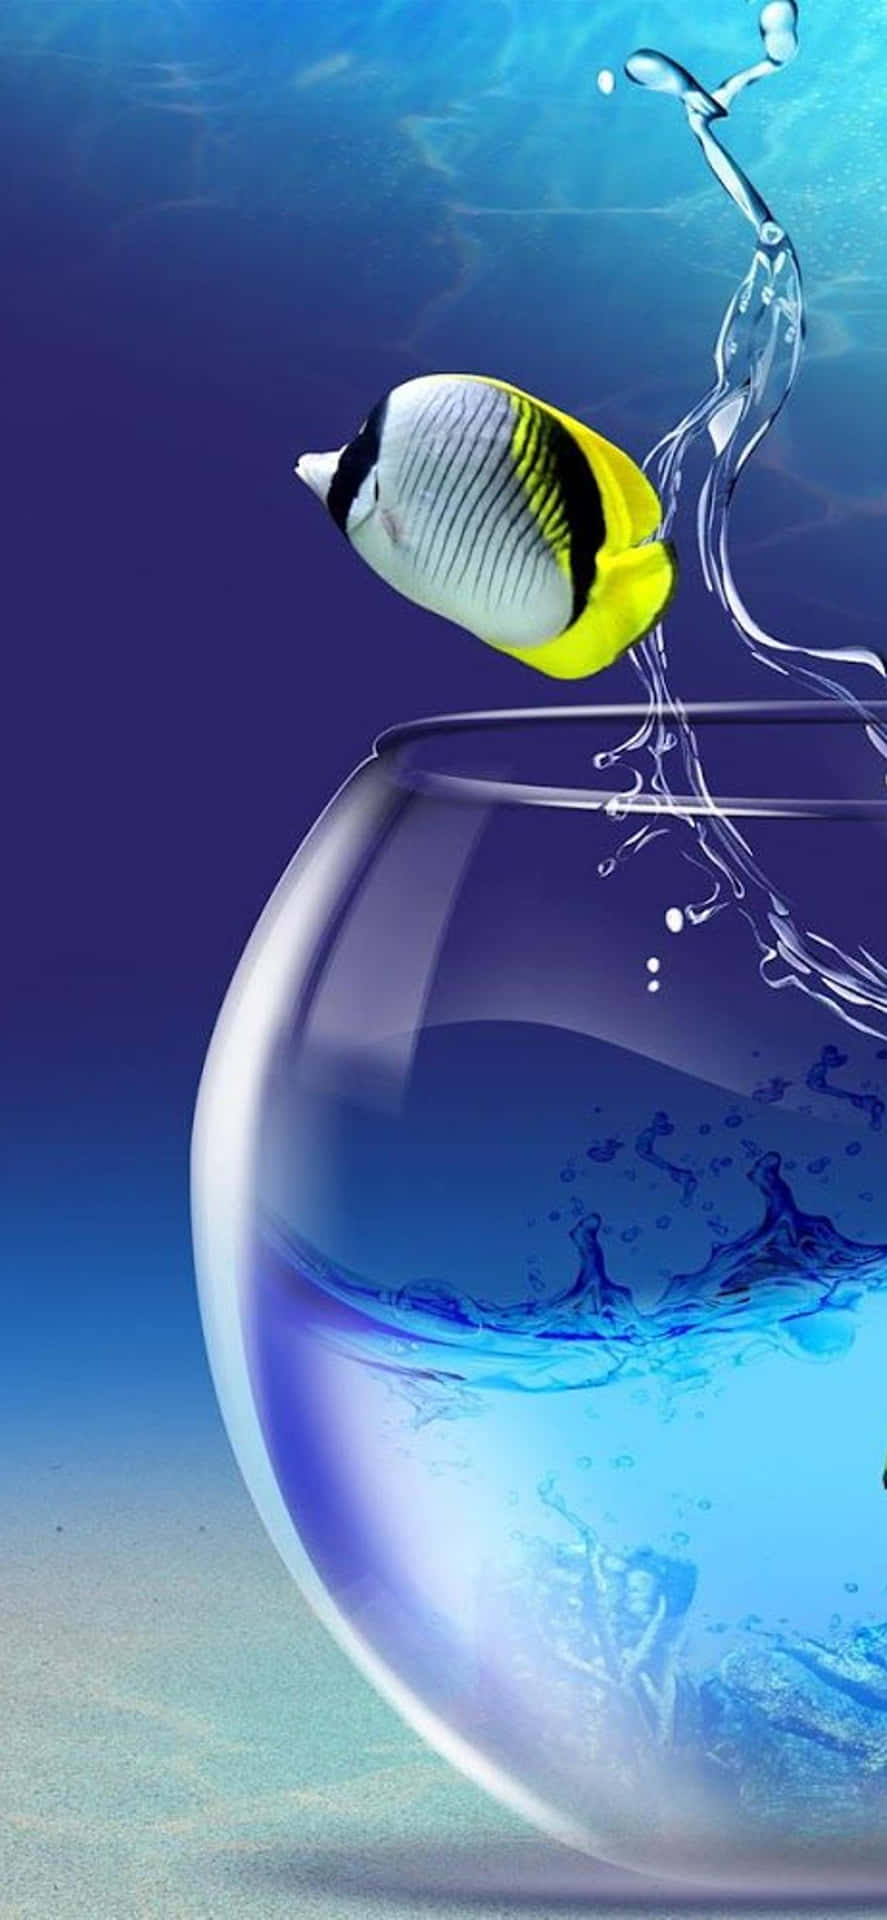 Fish Jumping Out Of A Bowl Of Water Wallpaper